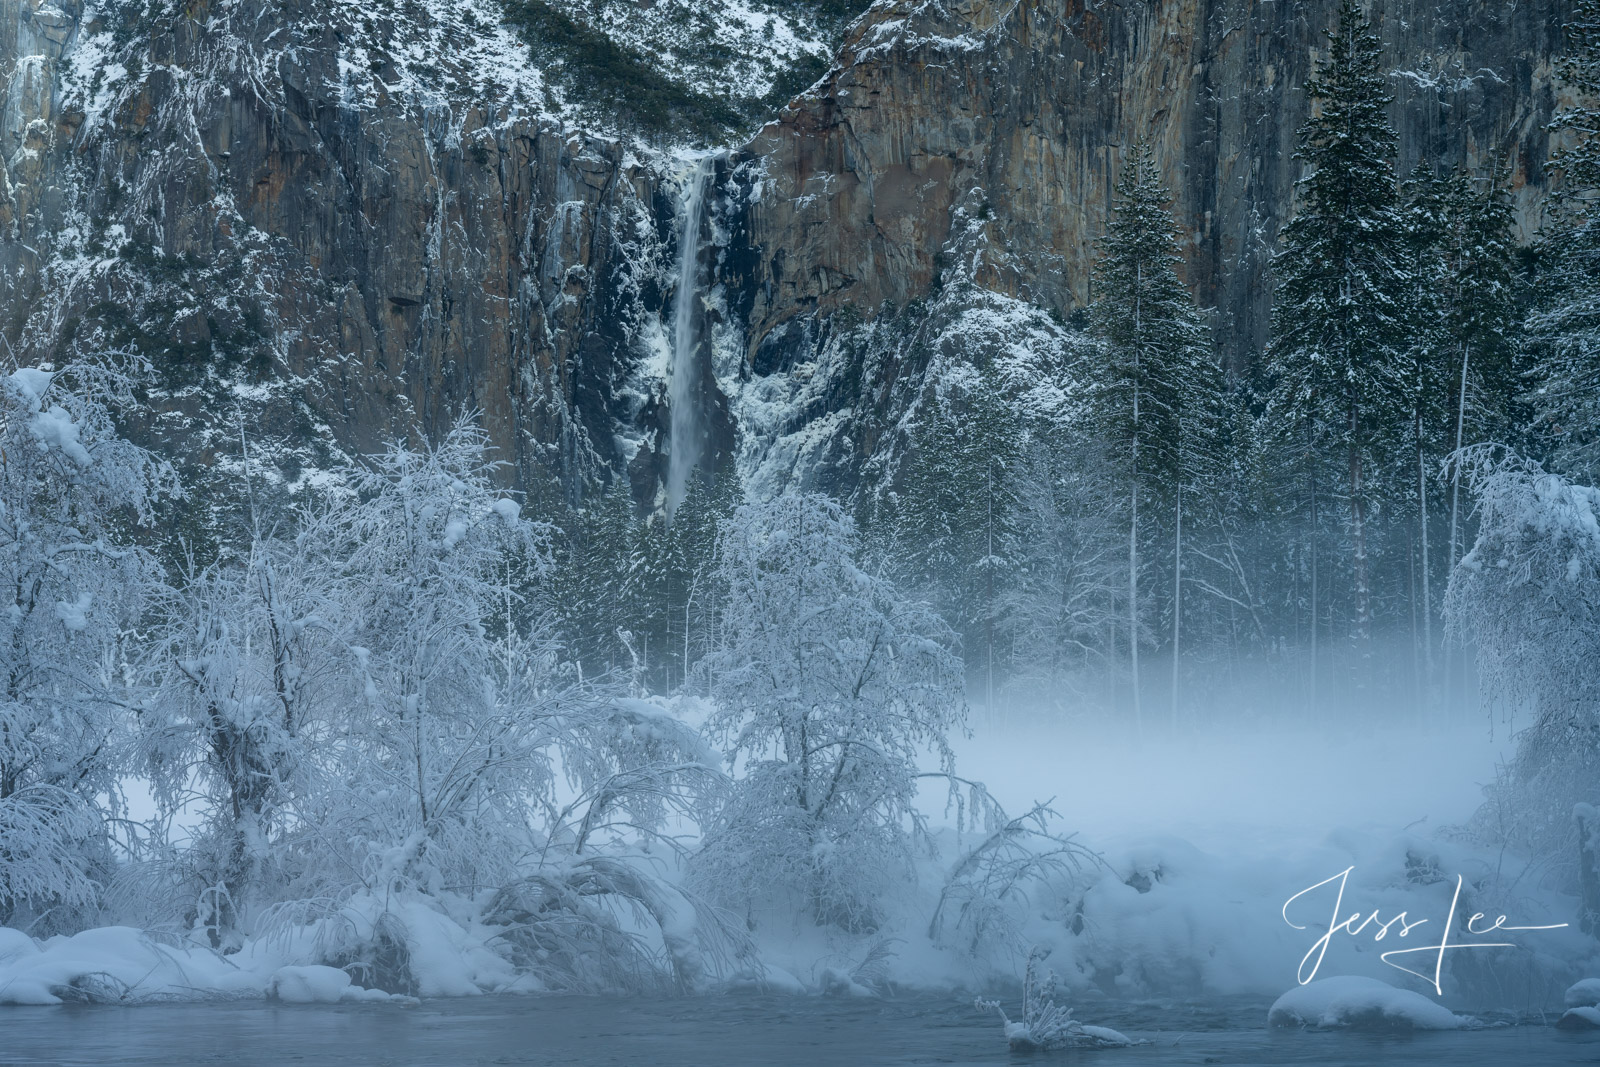 1 of 200 California Landscape Prints of Bridalveil Falls on a frosty morning in Yosemite valley. This is part of the luxurious...